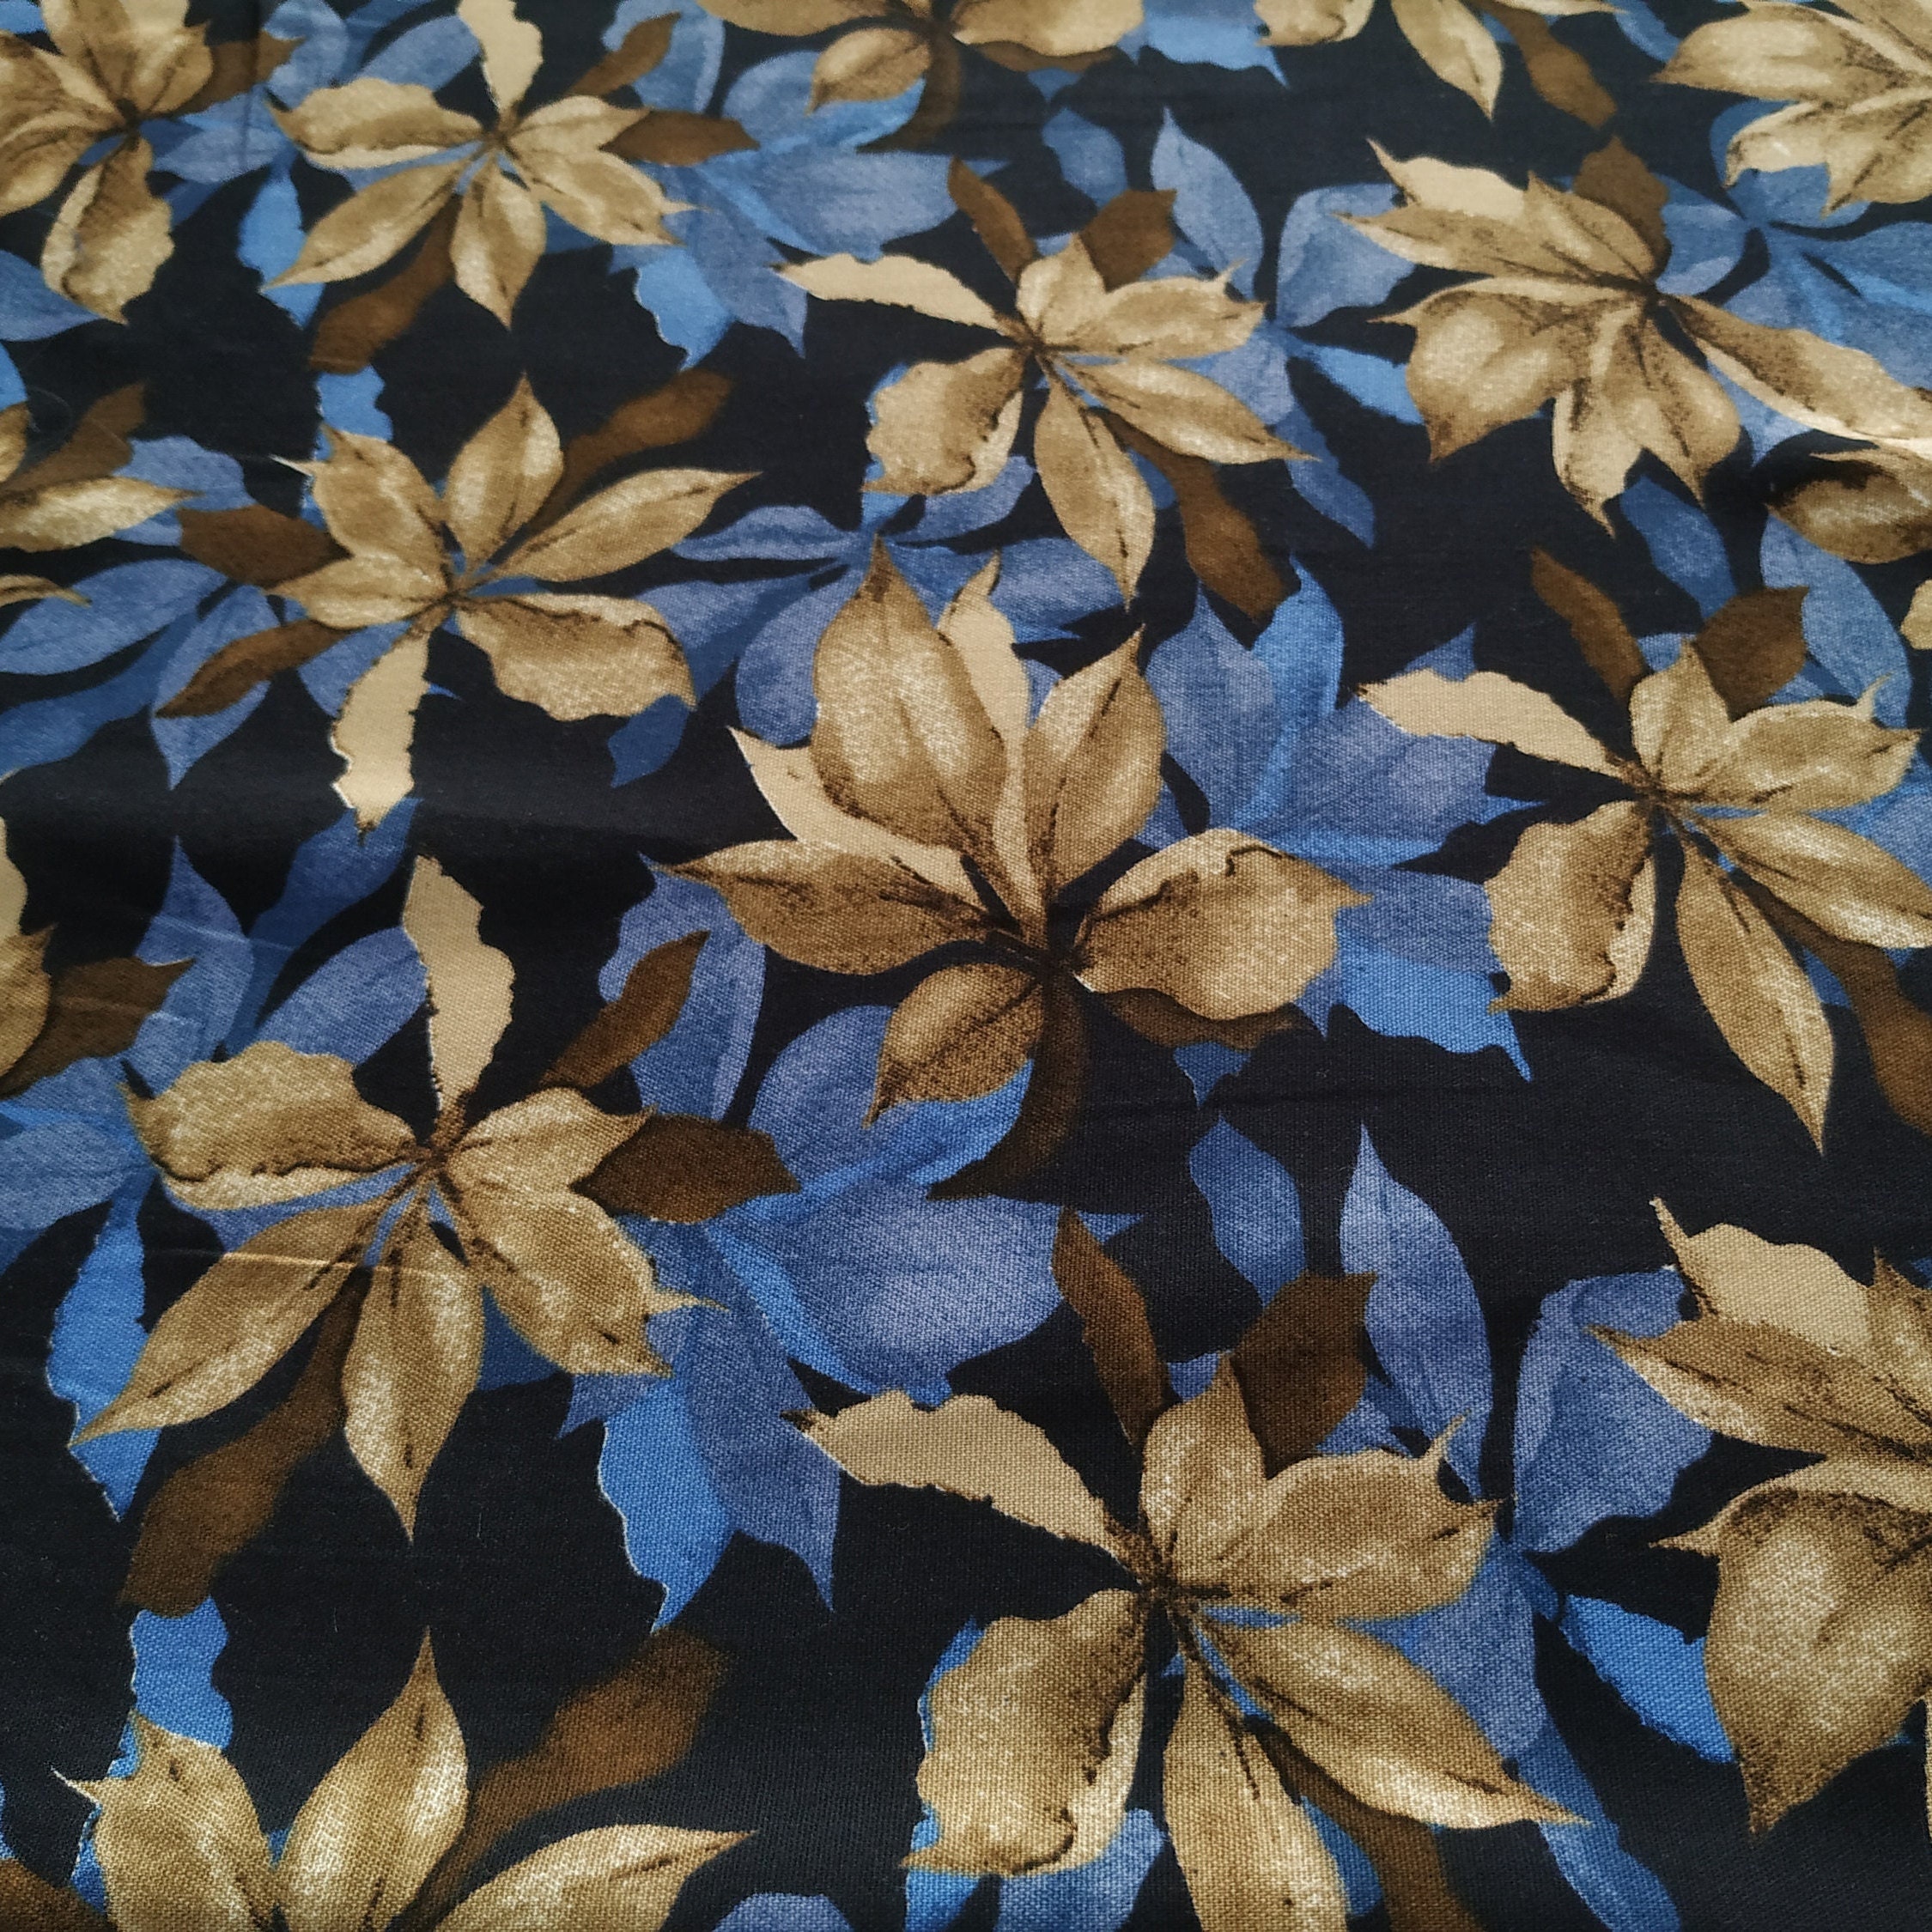 Floral Vintage Fabric by the Yard, Width 150cm /59 